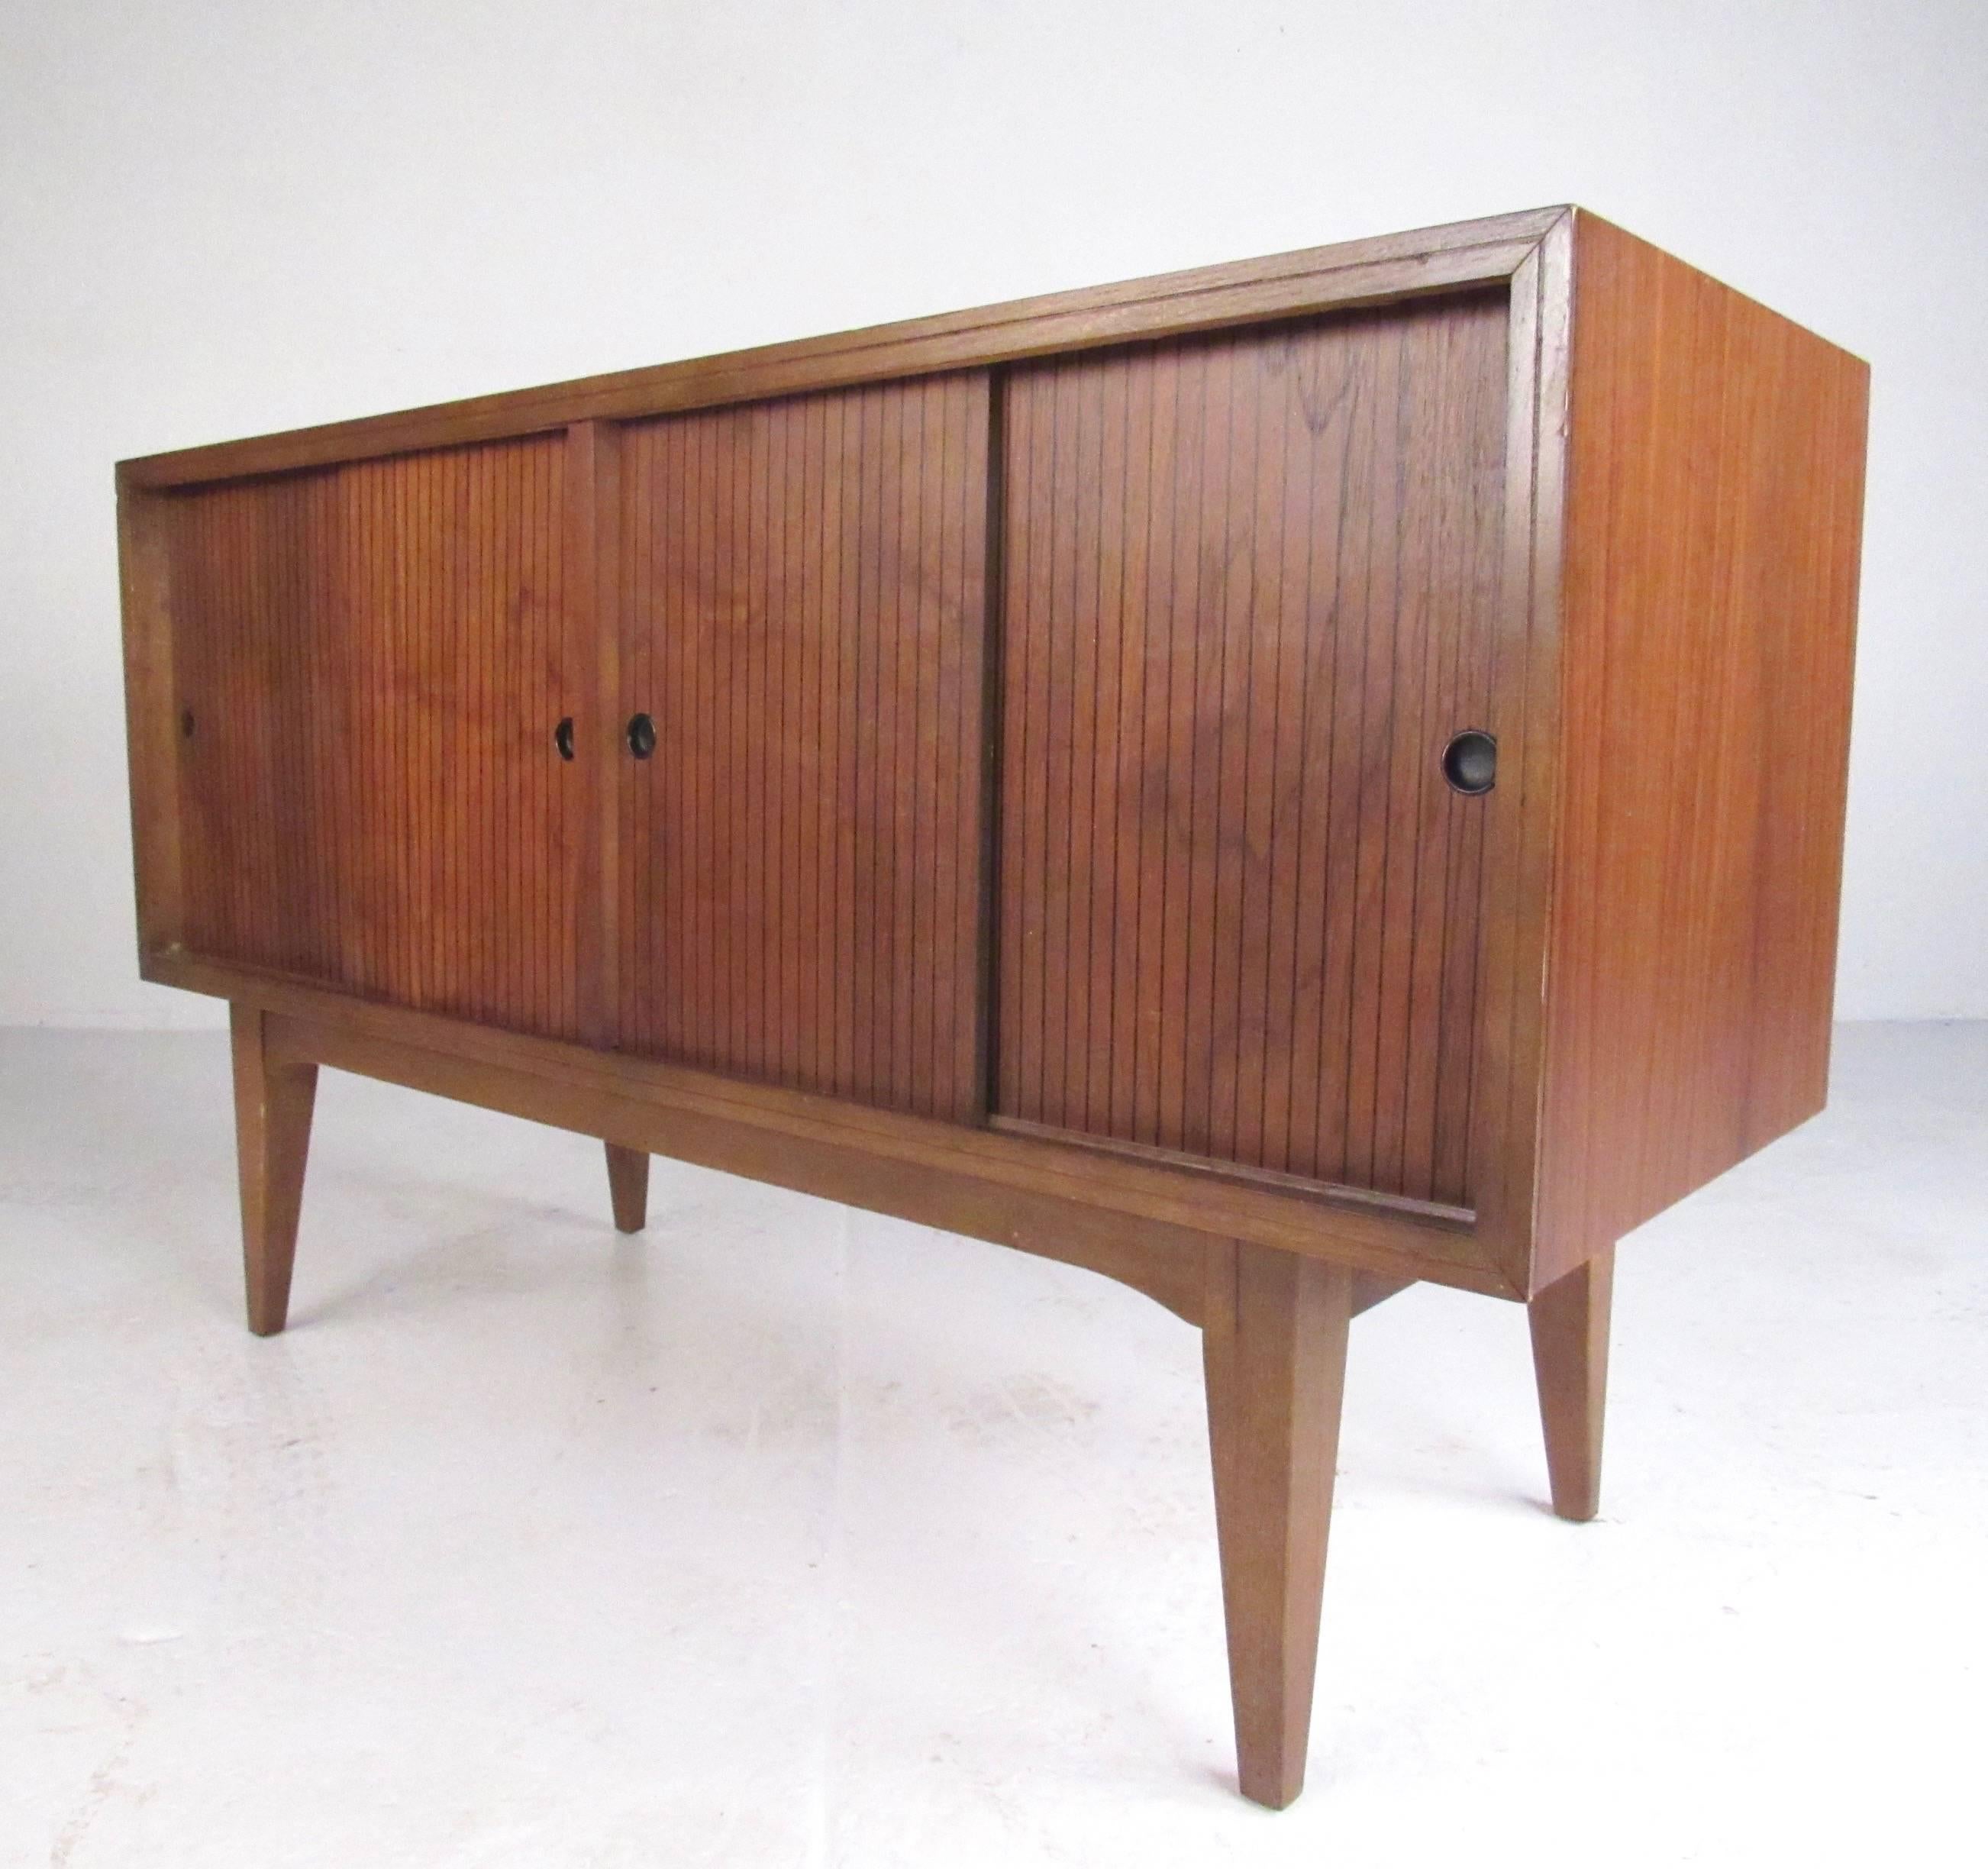 This uniquely sized vintage credenza features iconic Lane Furniture design with tapered legs, rich walnut finish, and slat style sliding doors. Petite size makes this Mid-Century Modern cabinet ideal for office storage or use as a media cabinet or